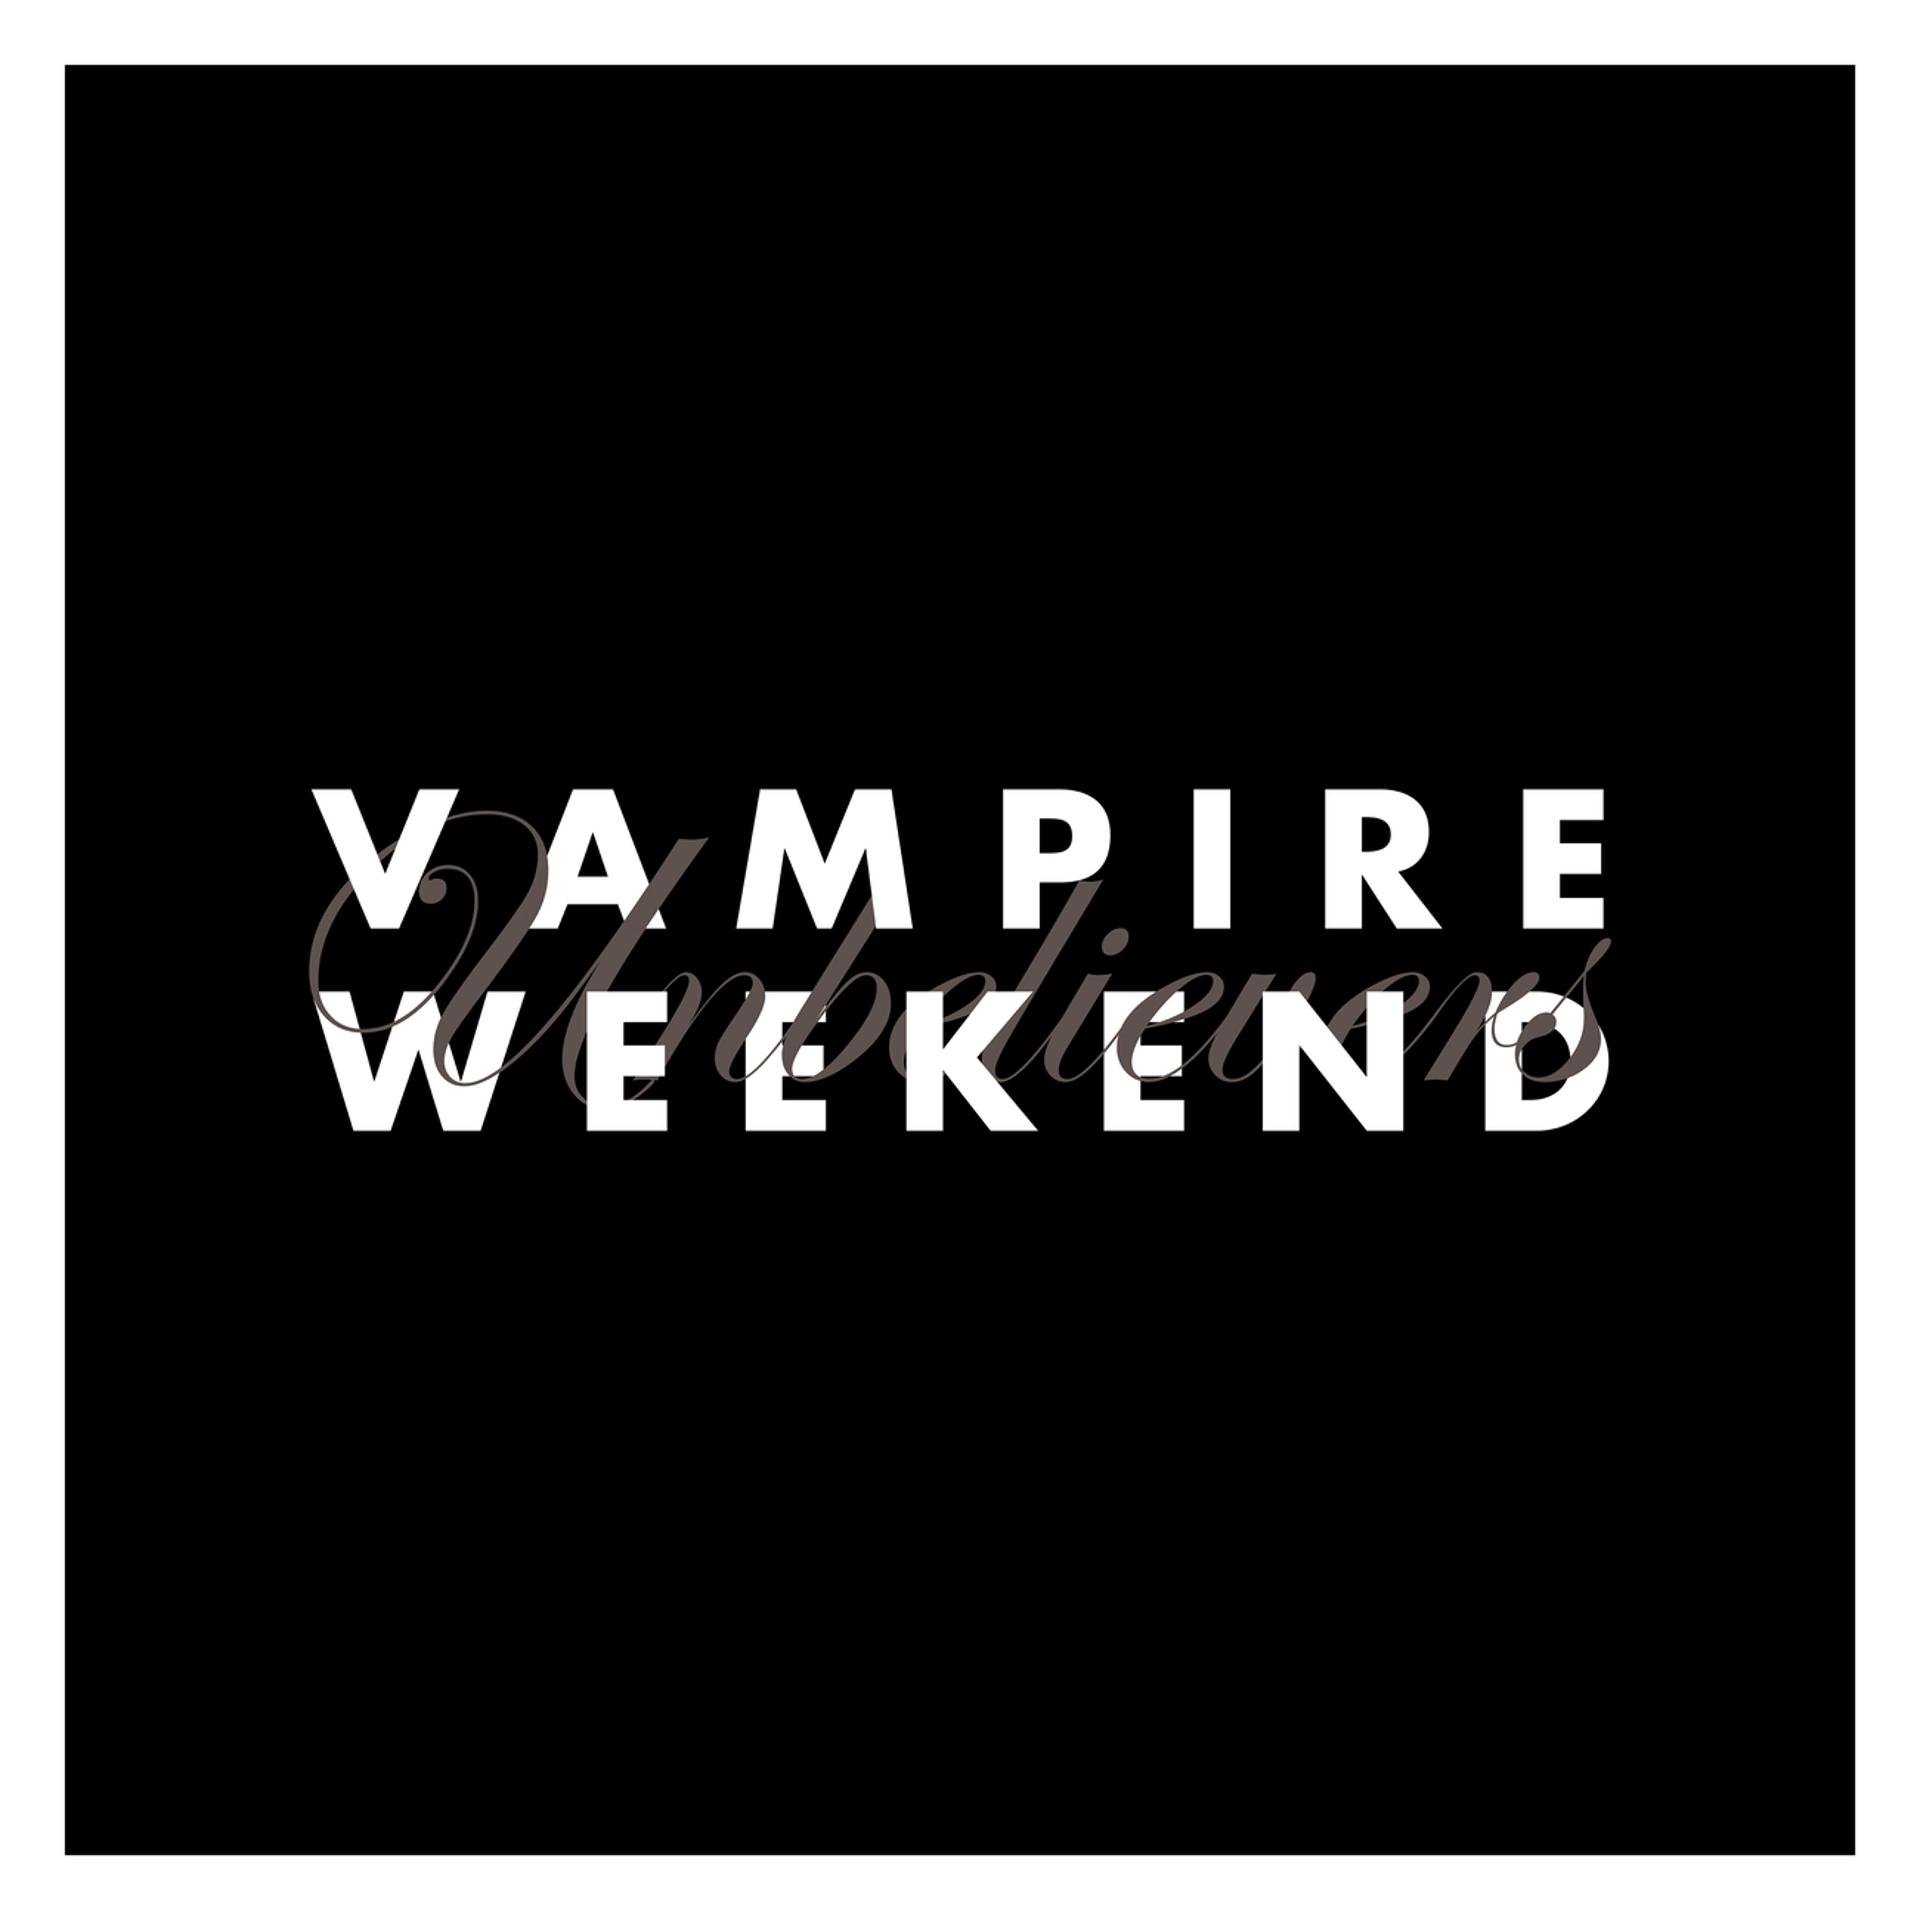 Vampire weekend "contra". Vampire weekend logo. Campus Vampire weekend. Vampire weekend Modern Vampires of the City обложка. Vampire weekend only god was above us